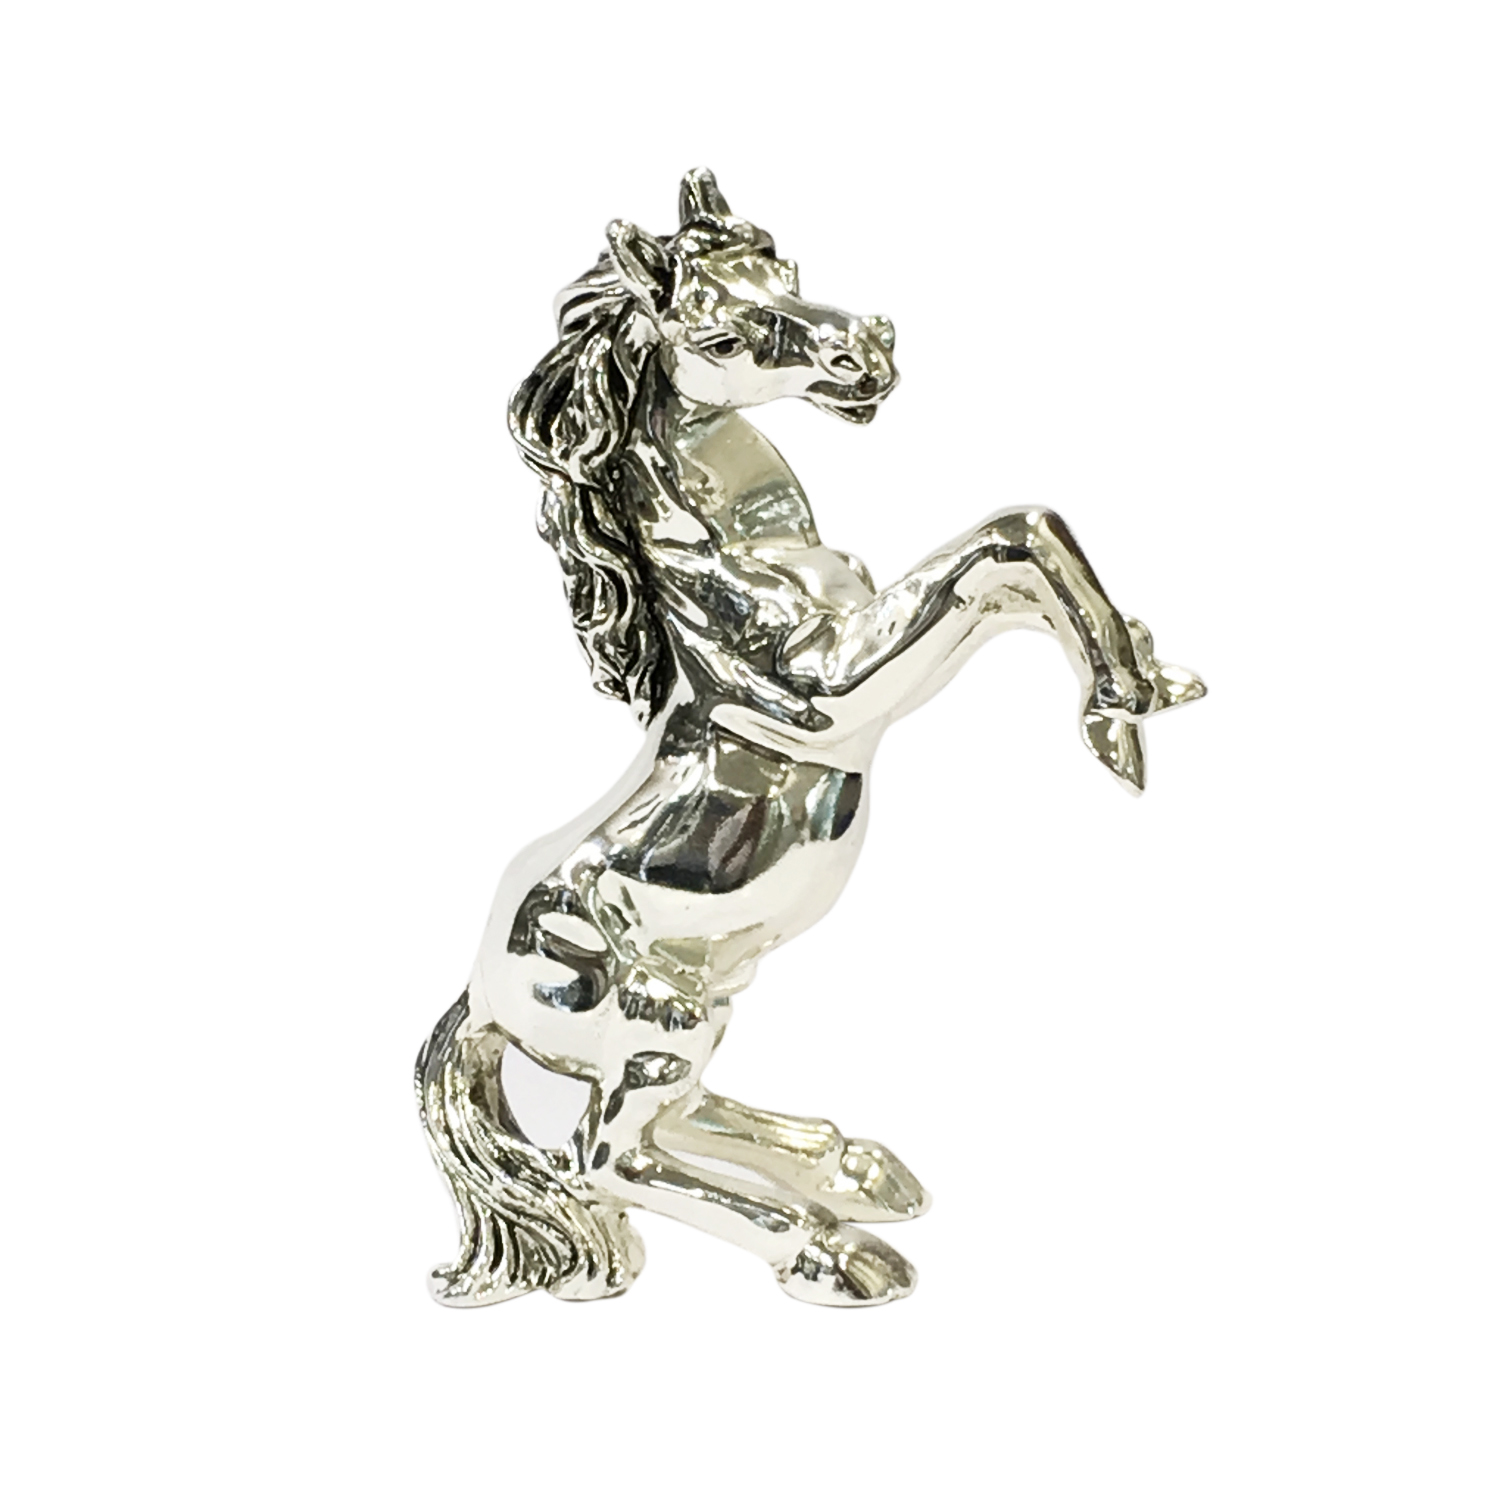 Standing Silver HORSE statue | 4.5″